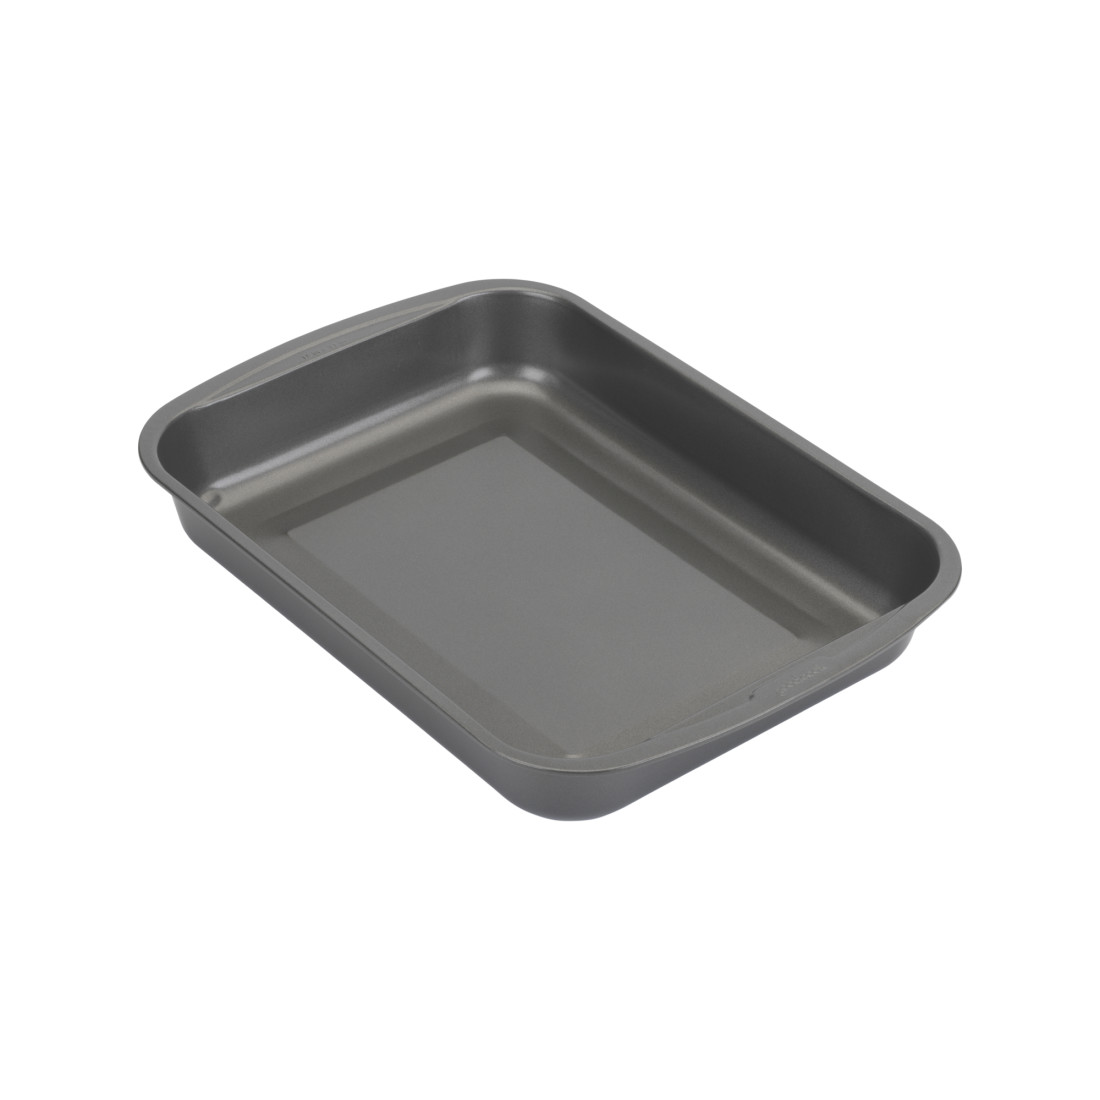 GoodCook Everyday Nonstick Extra Large Roast Pan with Rack Set, 17.5 x  11.75 Inch, Gray - GoodCook